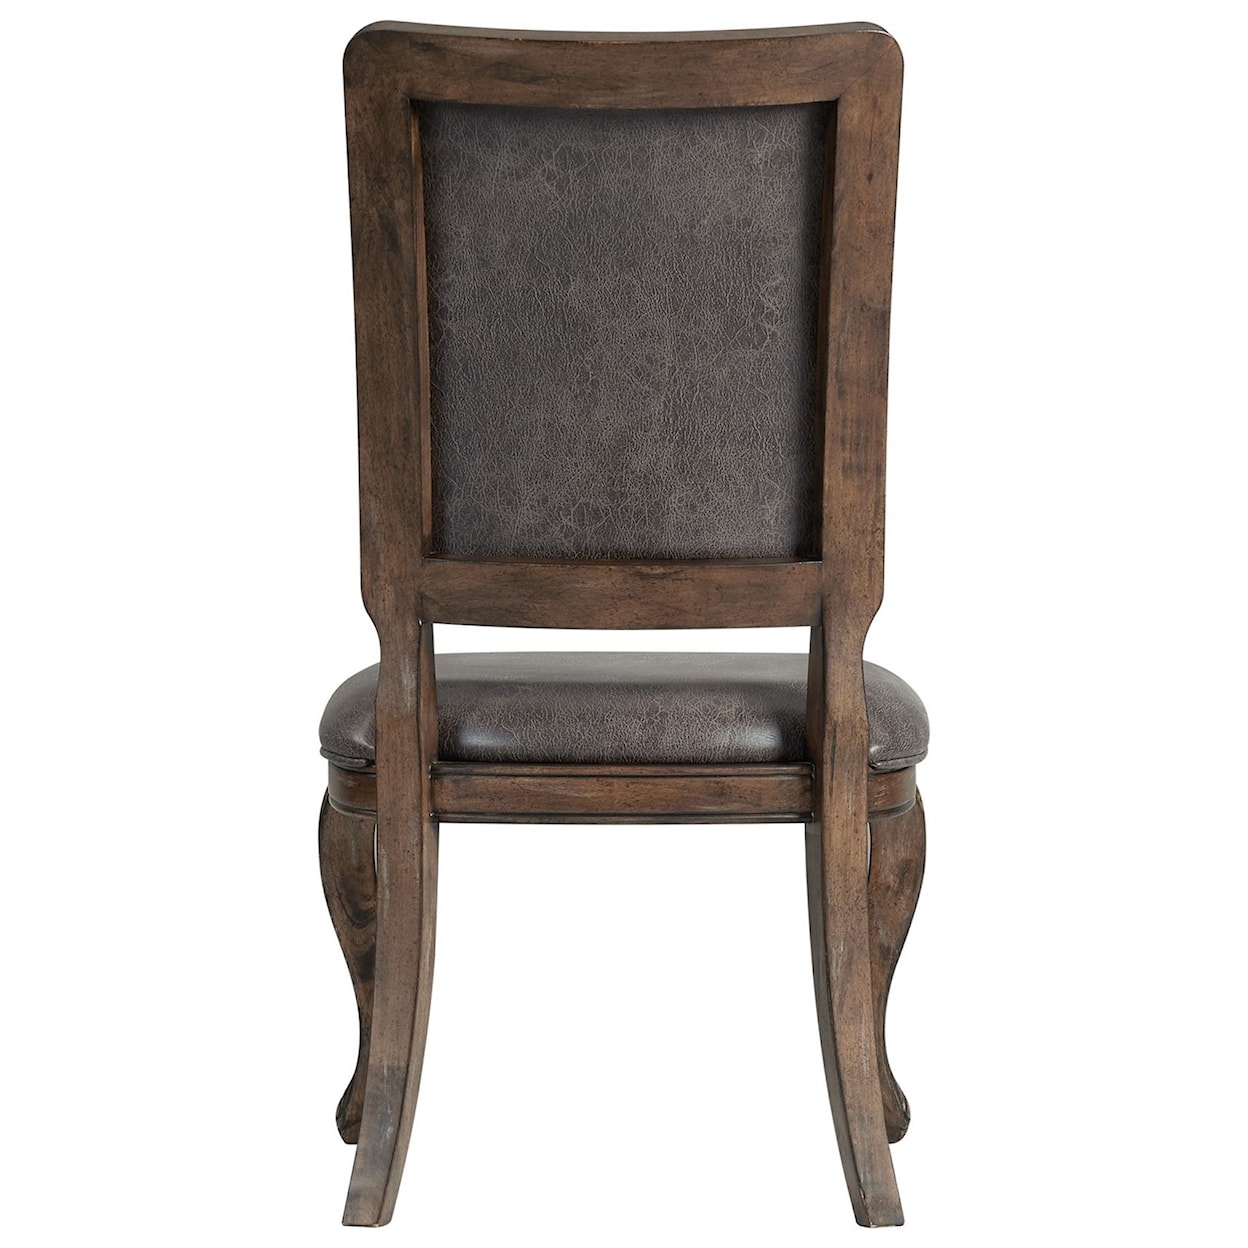 Elements Gramercy Side Chair